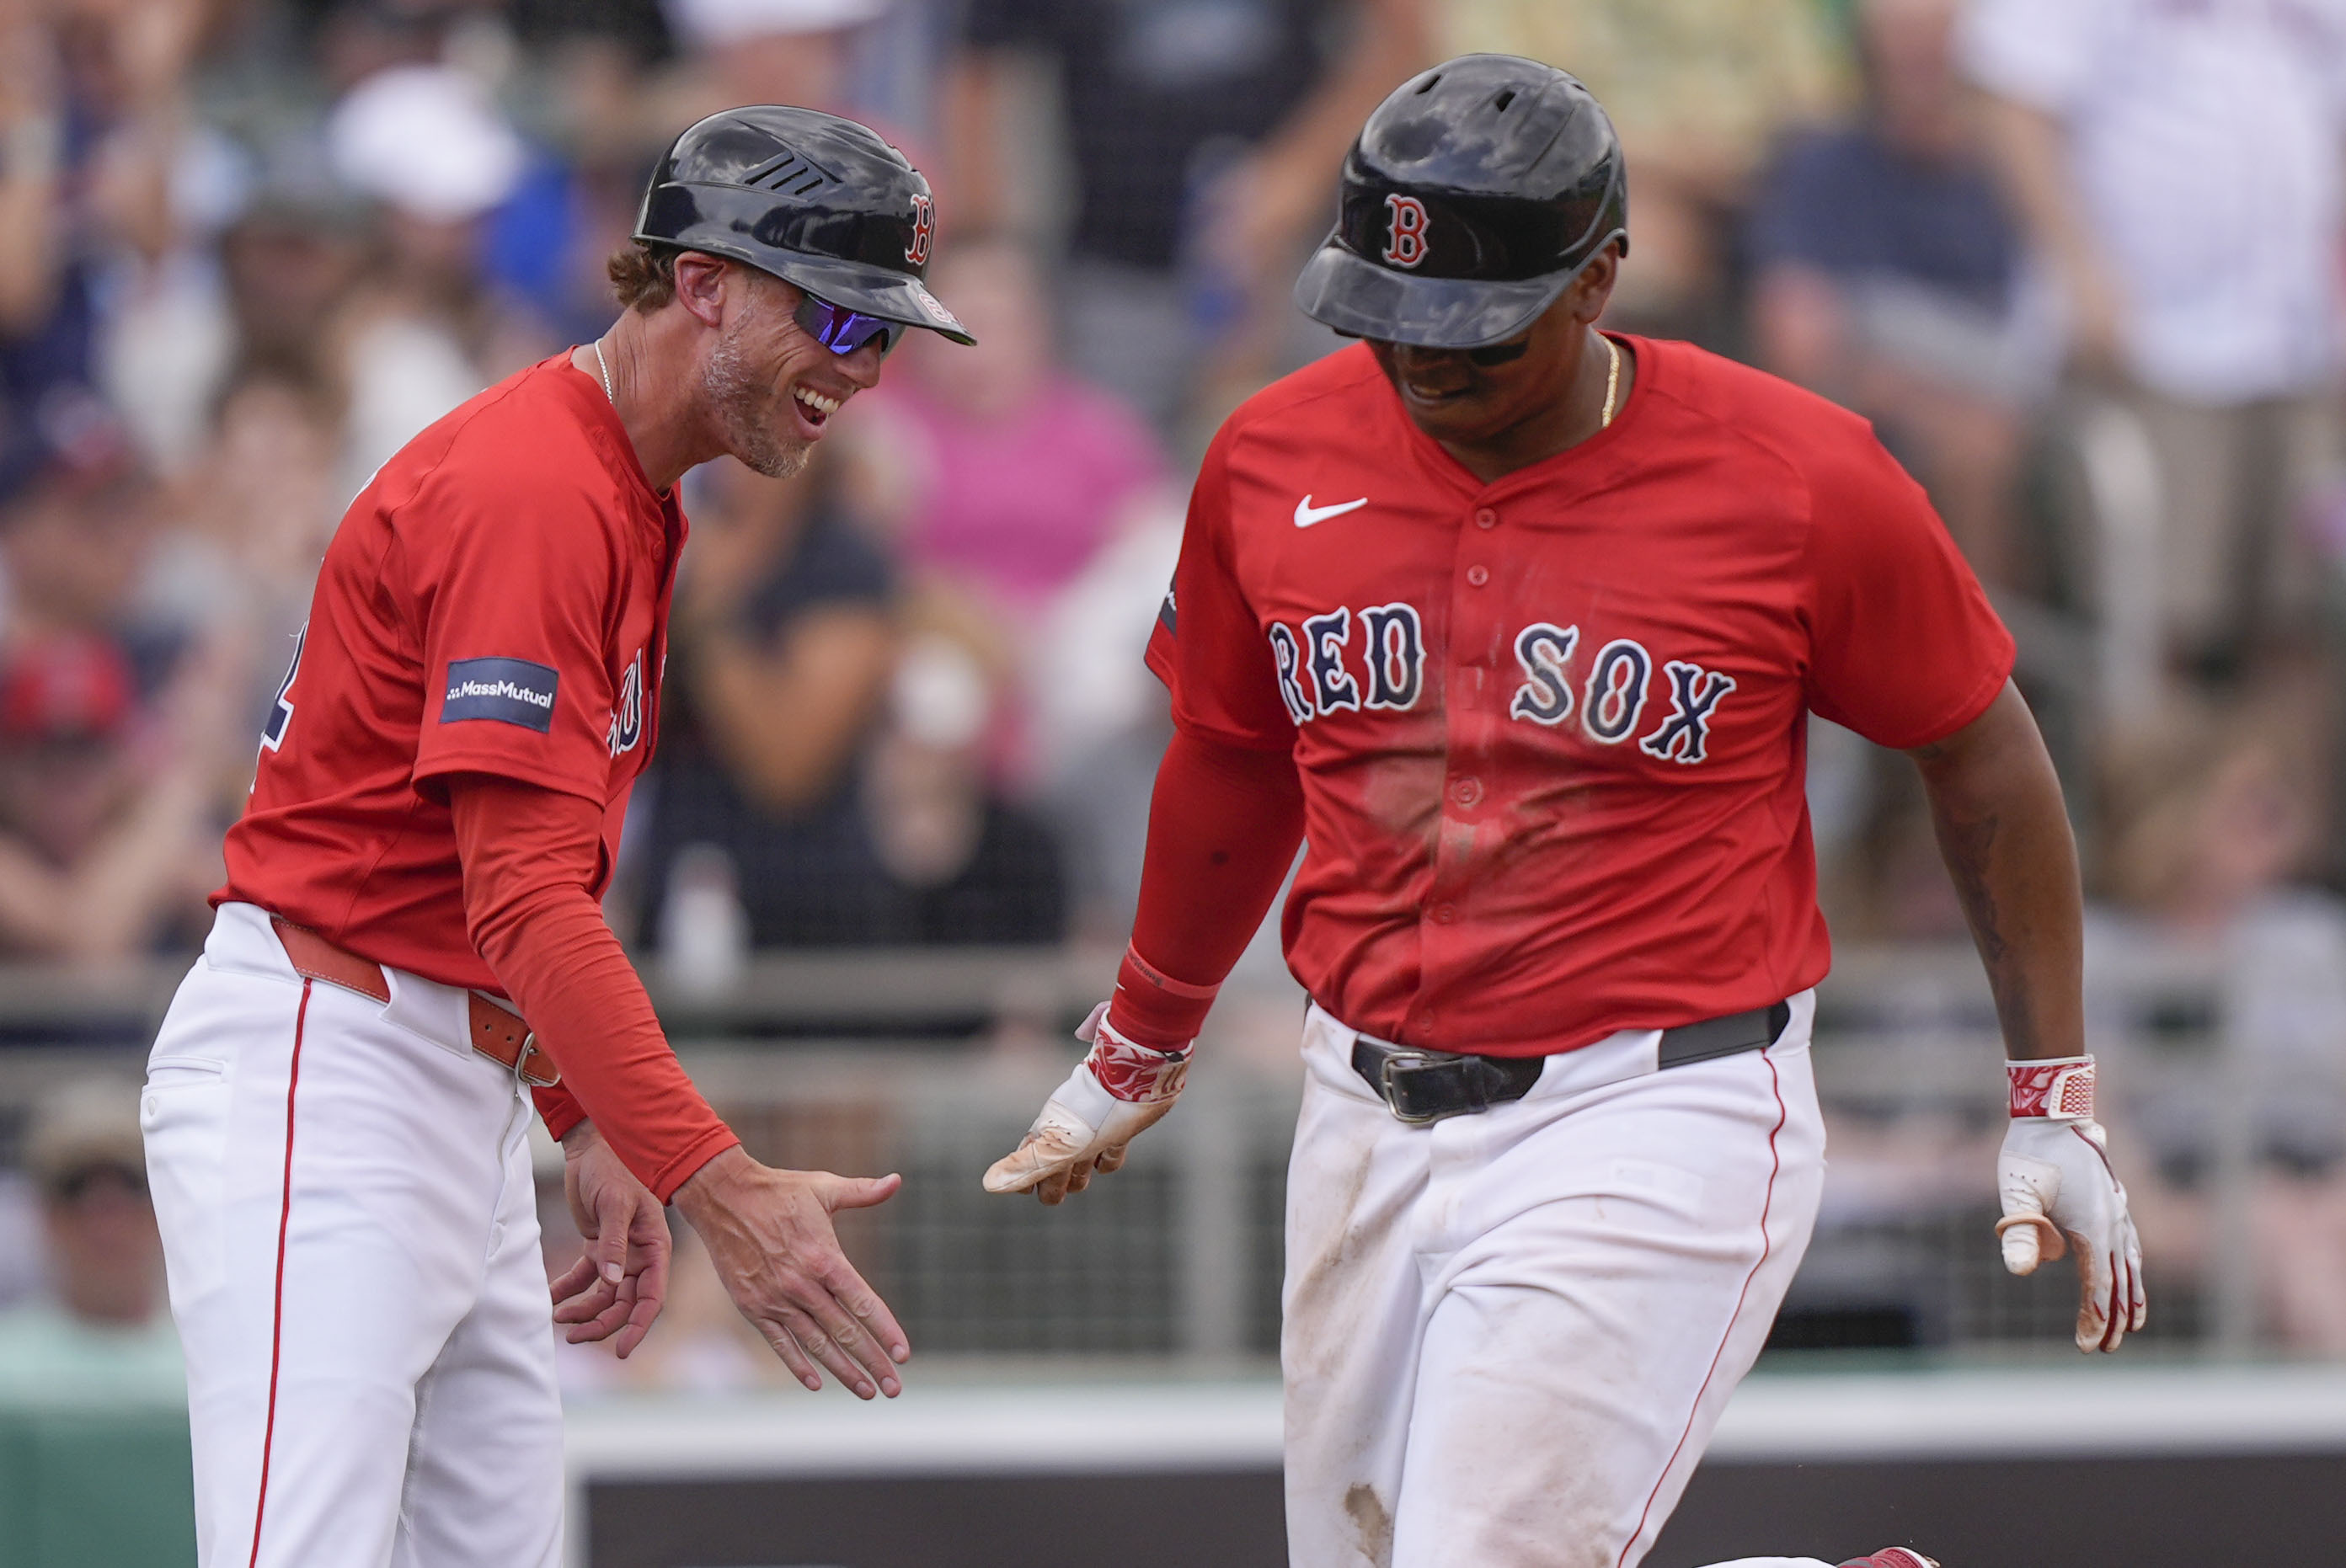 Thursday's spring training report: Rafael Devers (HR) and Trevor Story (two RBIs) lead Red Sox past Tigers - The Boston Globe